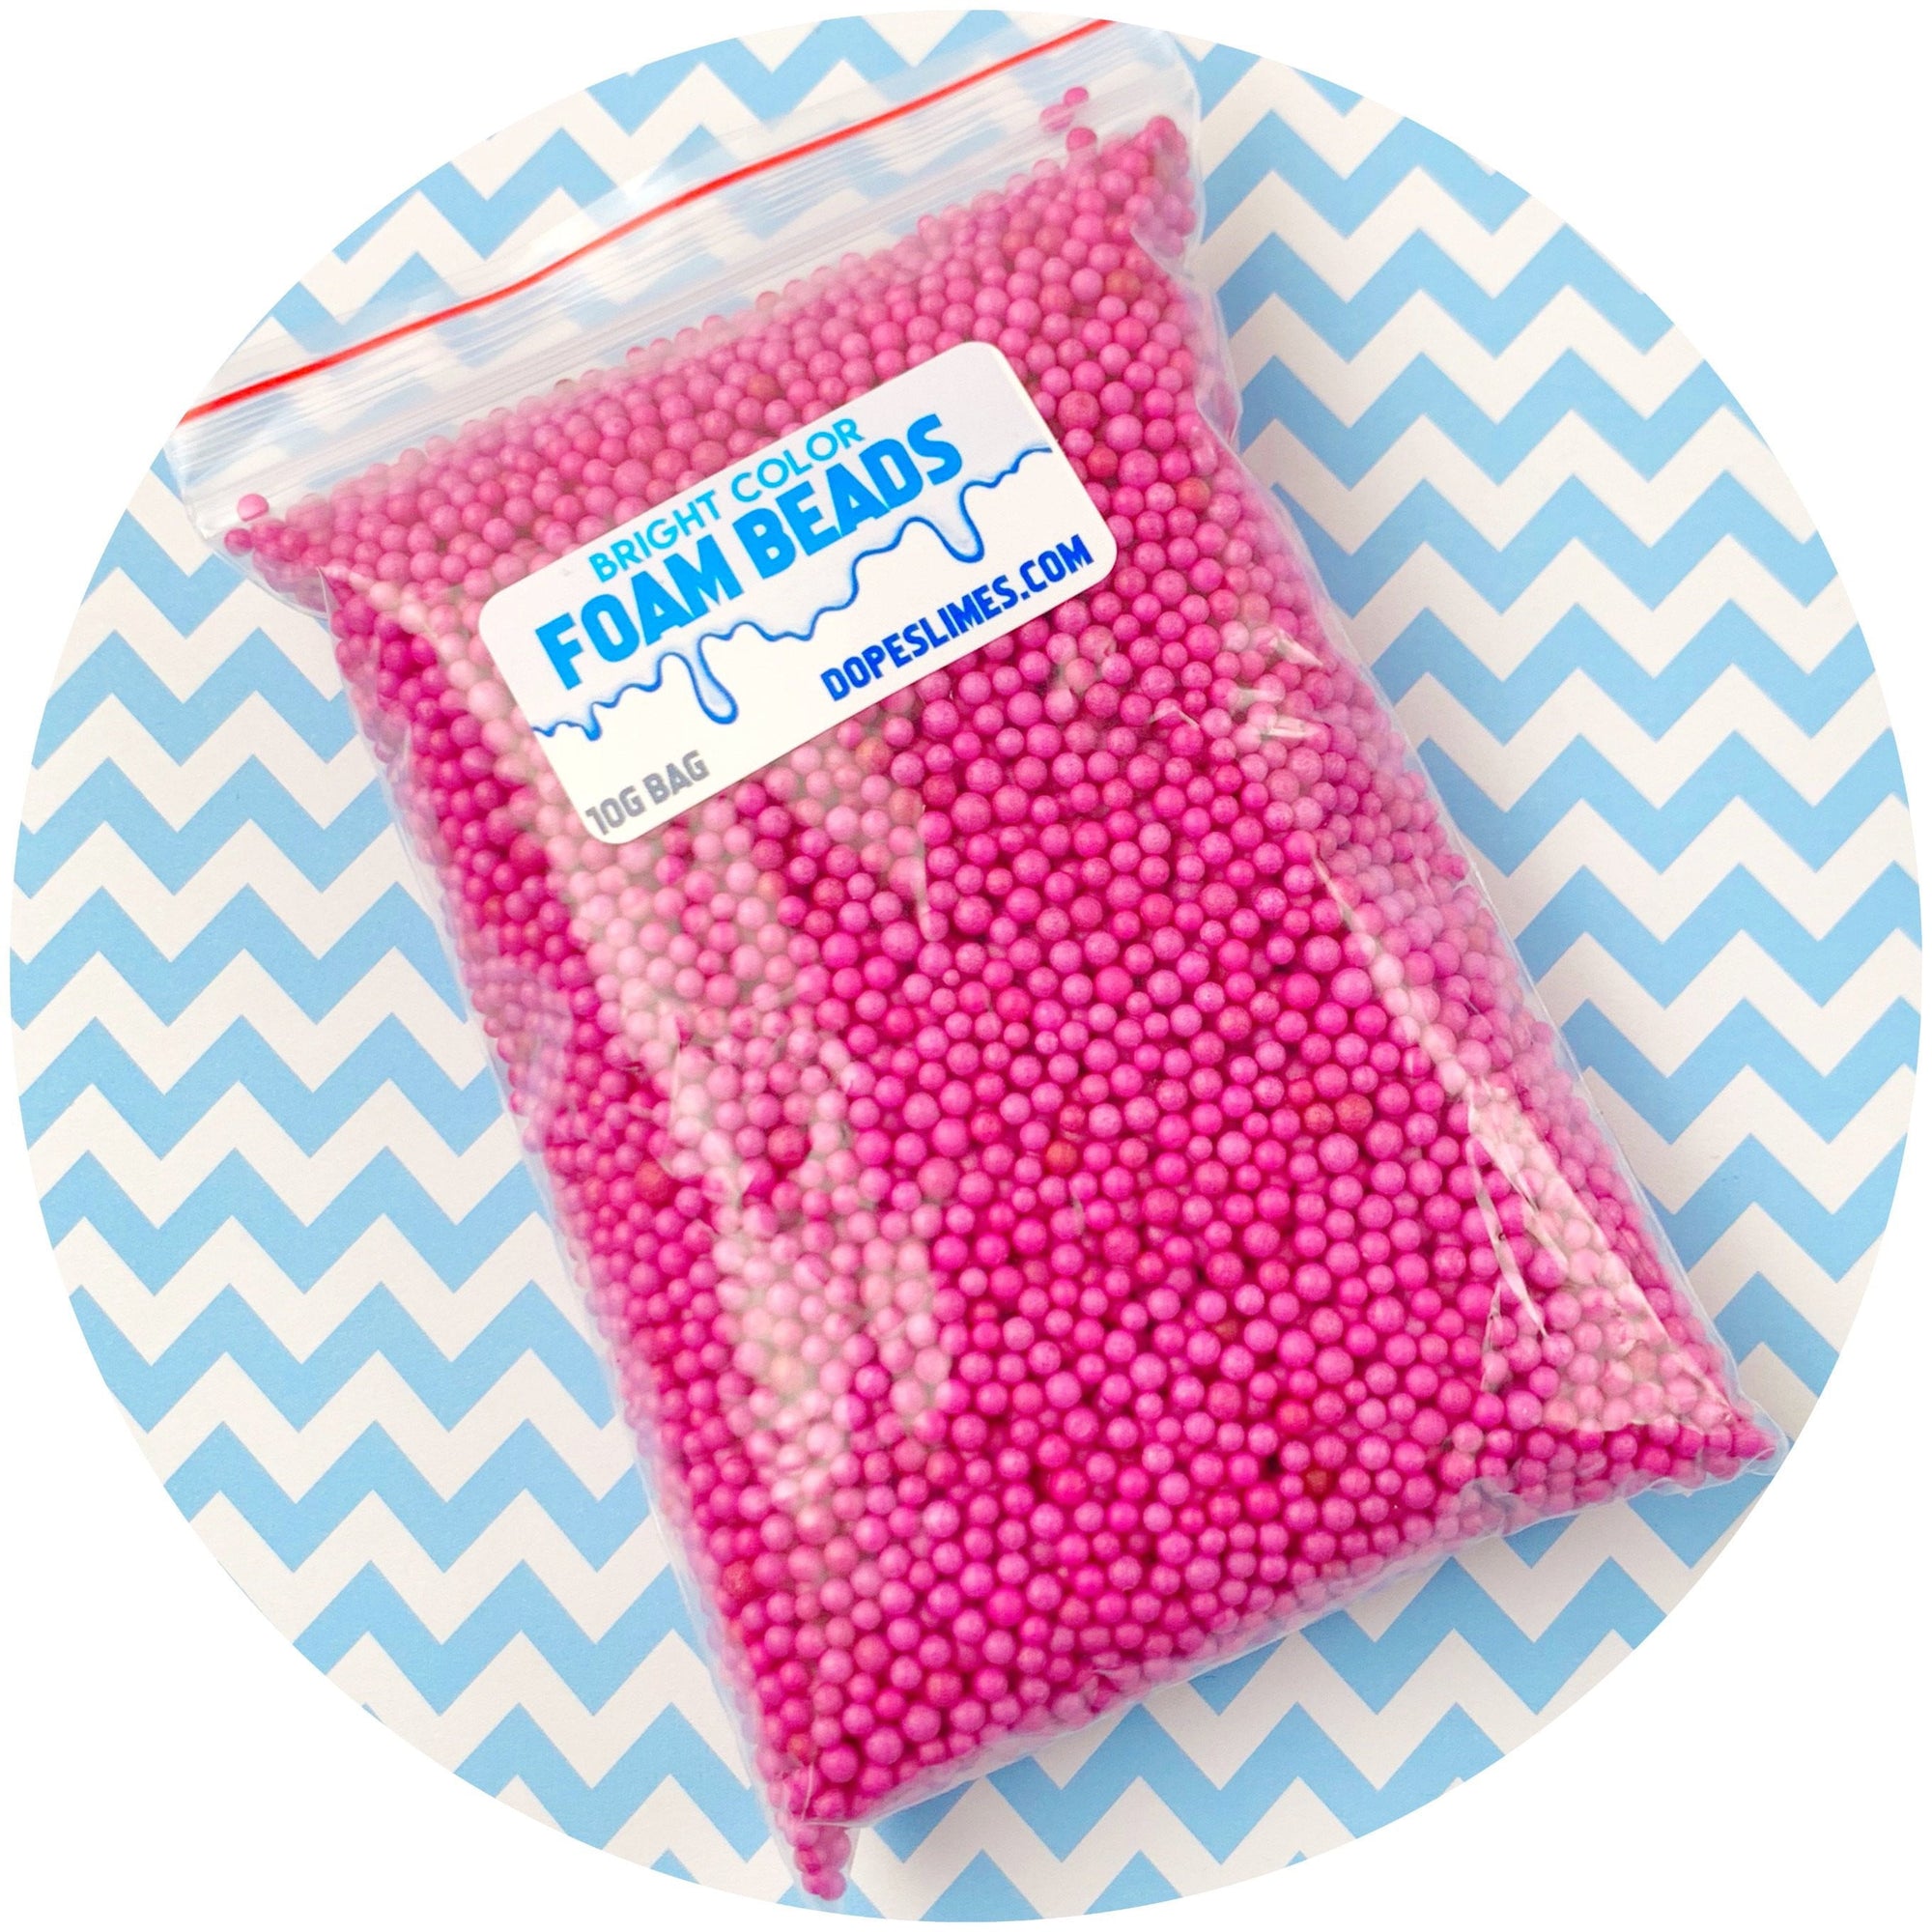 Small Bright Foam Beads - Buy Slime Supplies - DopeSlimes